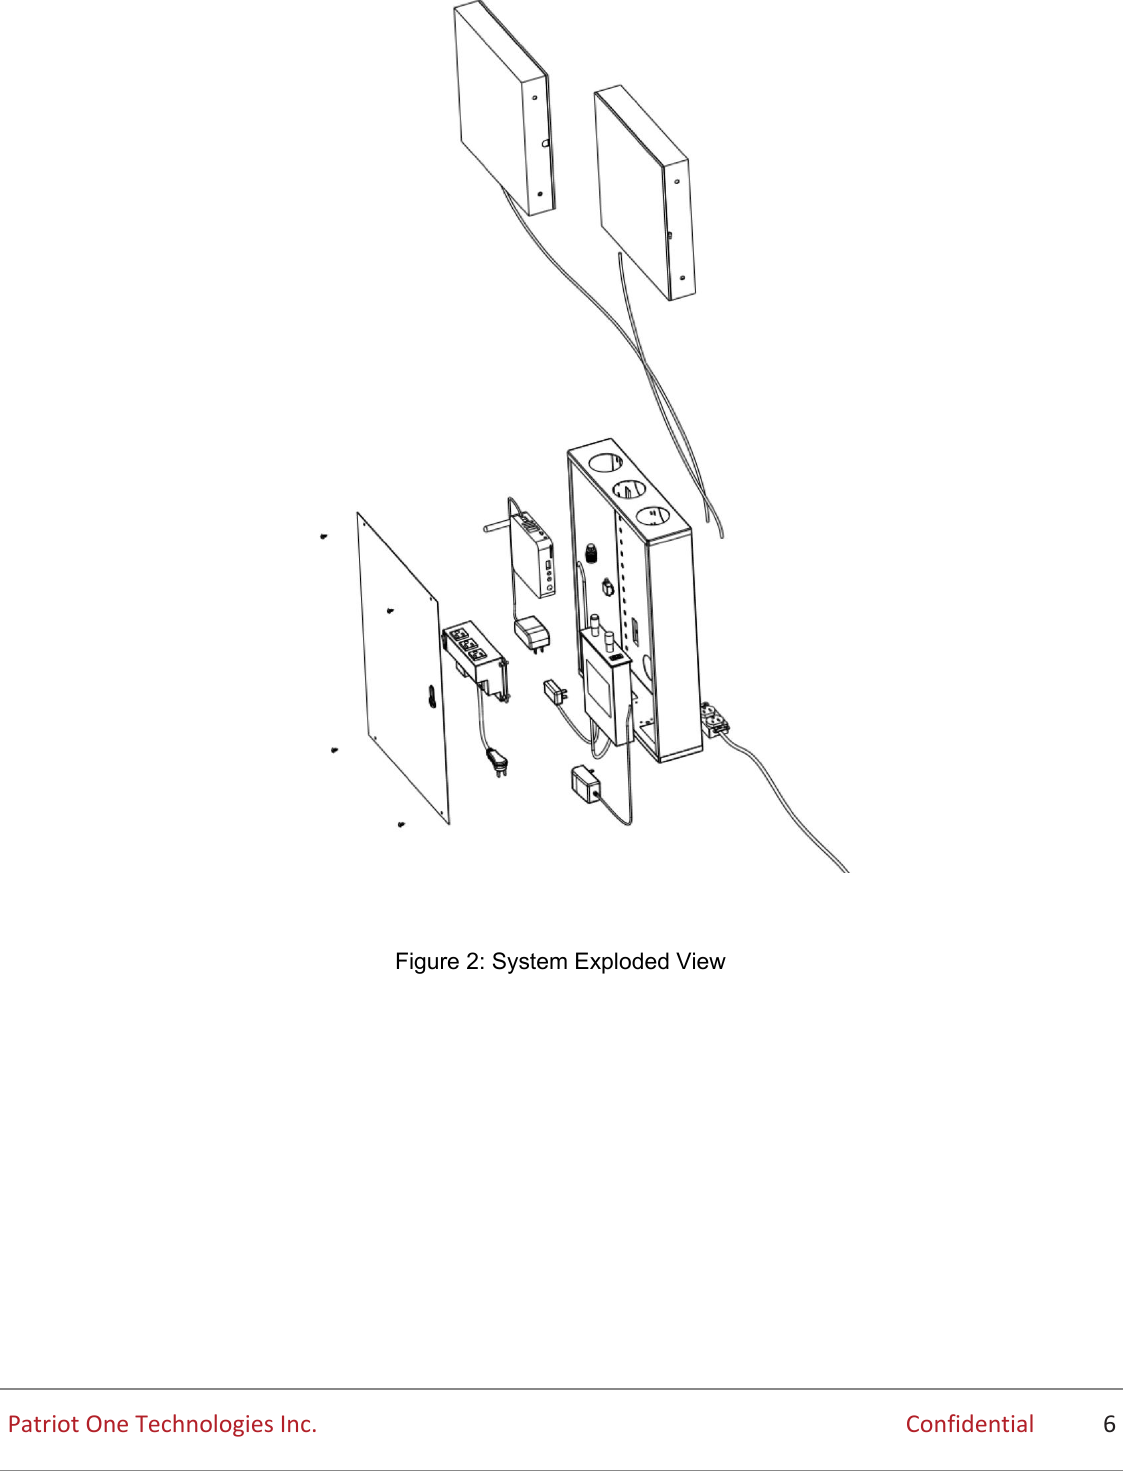   Figure 2: System Exploded View  Patriot One Technologies Inc. Confidential         6   